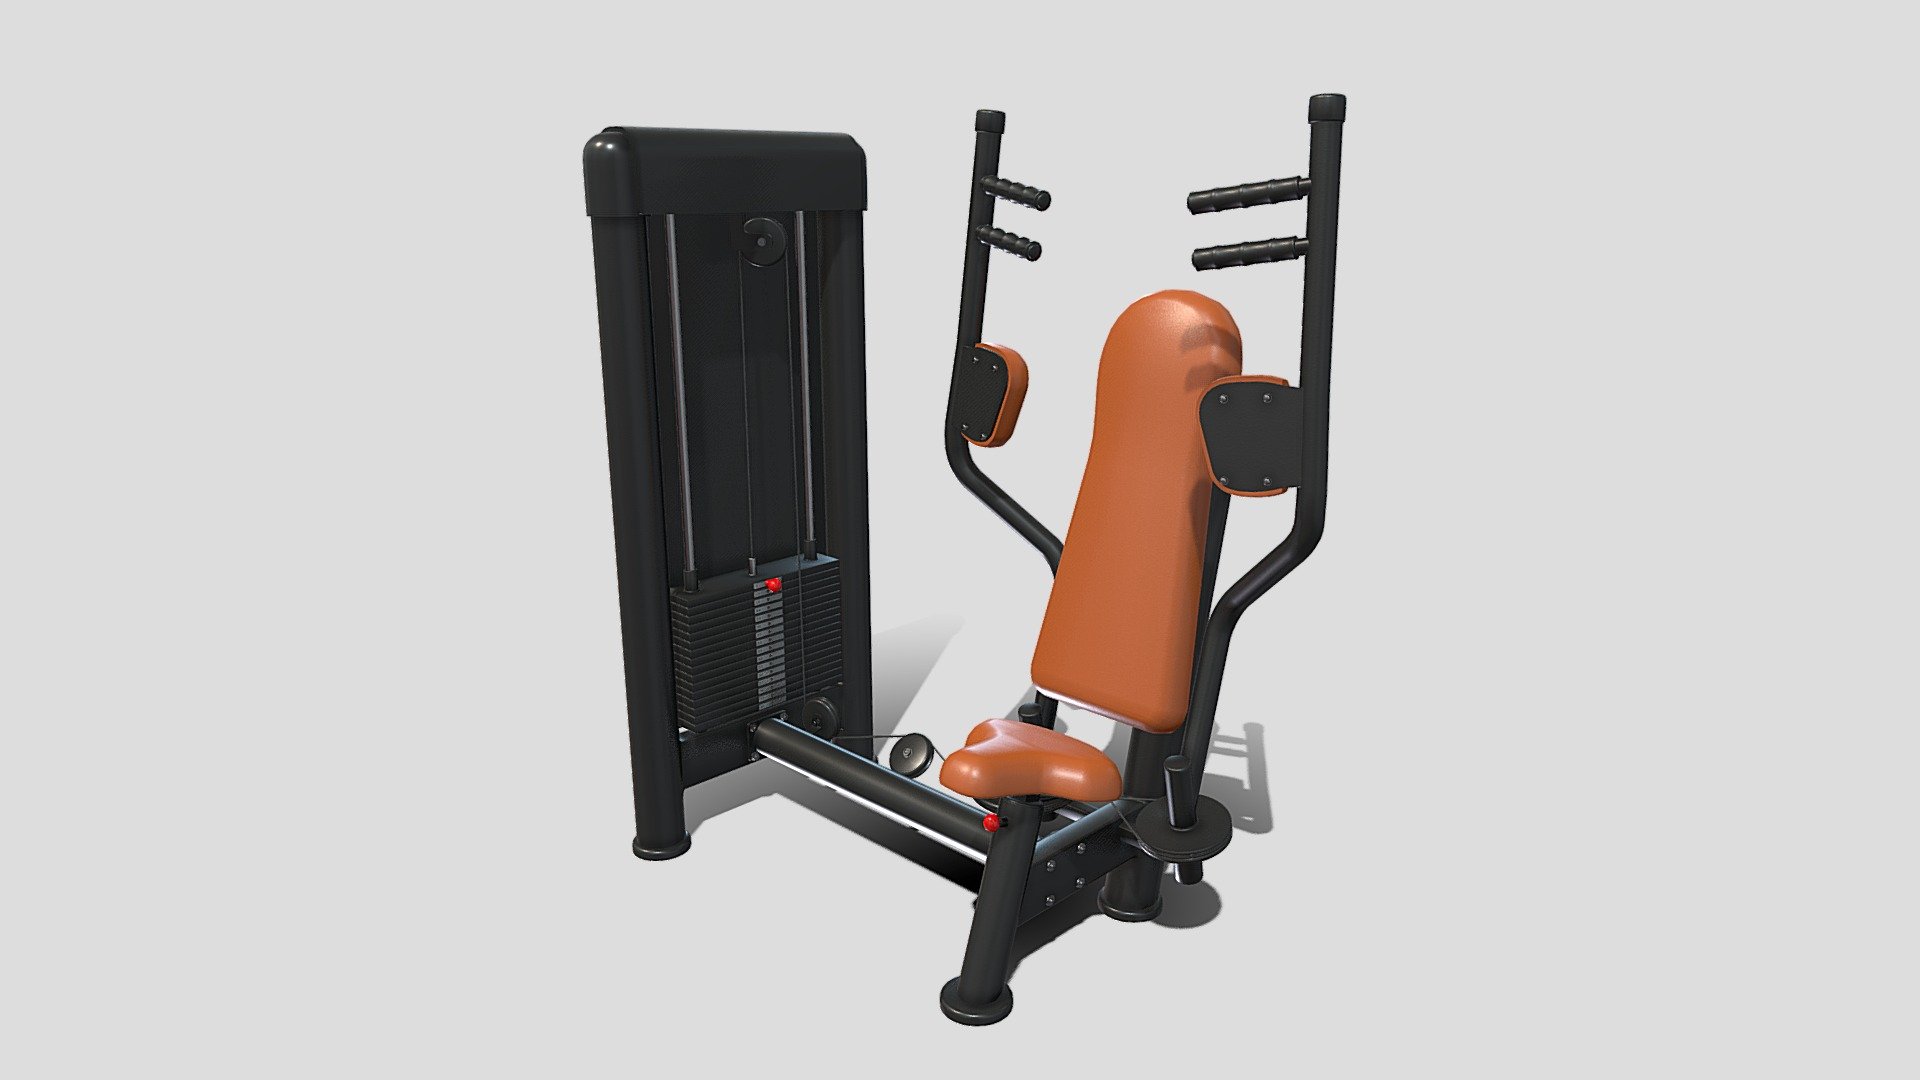 Gym machine 3d model built to real size, rendered with Cycles in Blender, as per seen on attached images. 

File formats:
-.blend, rendered with cycles, as seen in the images;
-.obj, with materials applied;
-.dae, with materials applied;
-.fbx, with materials applied;
-.stl;

Files come named appropriately and split by file format.

3D Software:
The 3D model was originally created in Blender 3.1 and rendered with Cycles.

Materials and textures:
The models have materials applied in all formats, and are ready to import and render.
Materials are image based using PBR, the model comes with five 4k png image textures.

Preview scenes:
The preview images are rendered in Blender using its built-in render engine &lsquo;Cycles'.
Note that the blend files come directly with the rendering scene included and the render command will generate the exact result as seen in previews.

General:
The models are built mostly out of quads.

For any problems please feel free to contact me.

Don't forget to rate and enjoy! - Pec deck machine - Buy Royalty Free 3D model by dragosburian 3d model